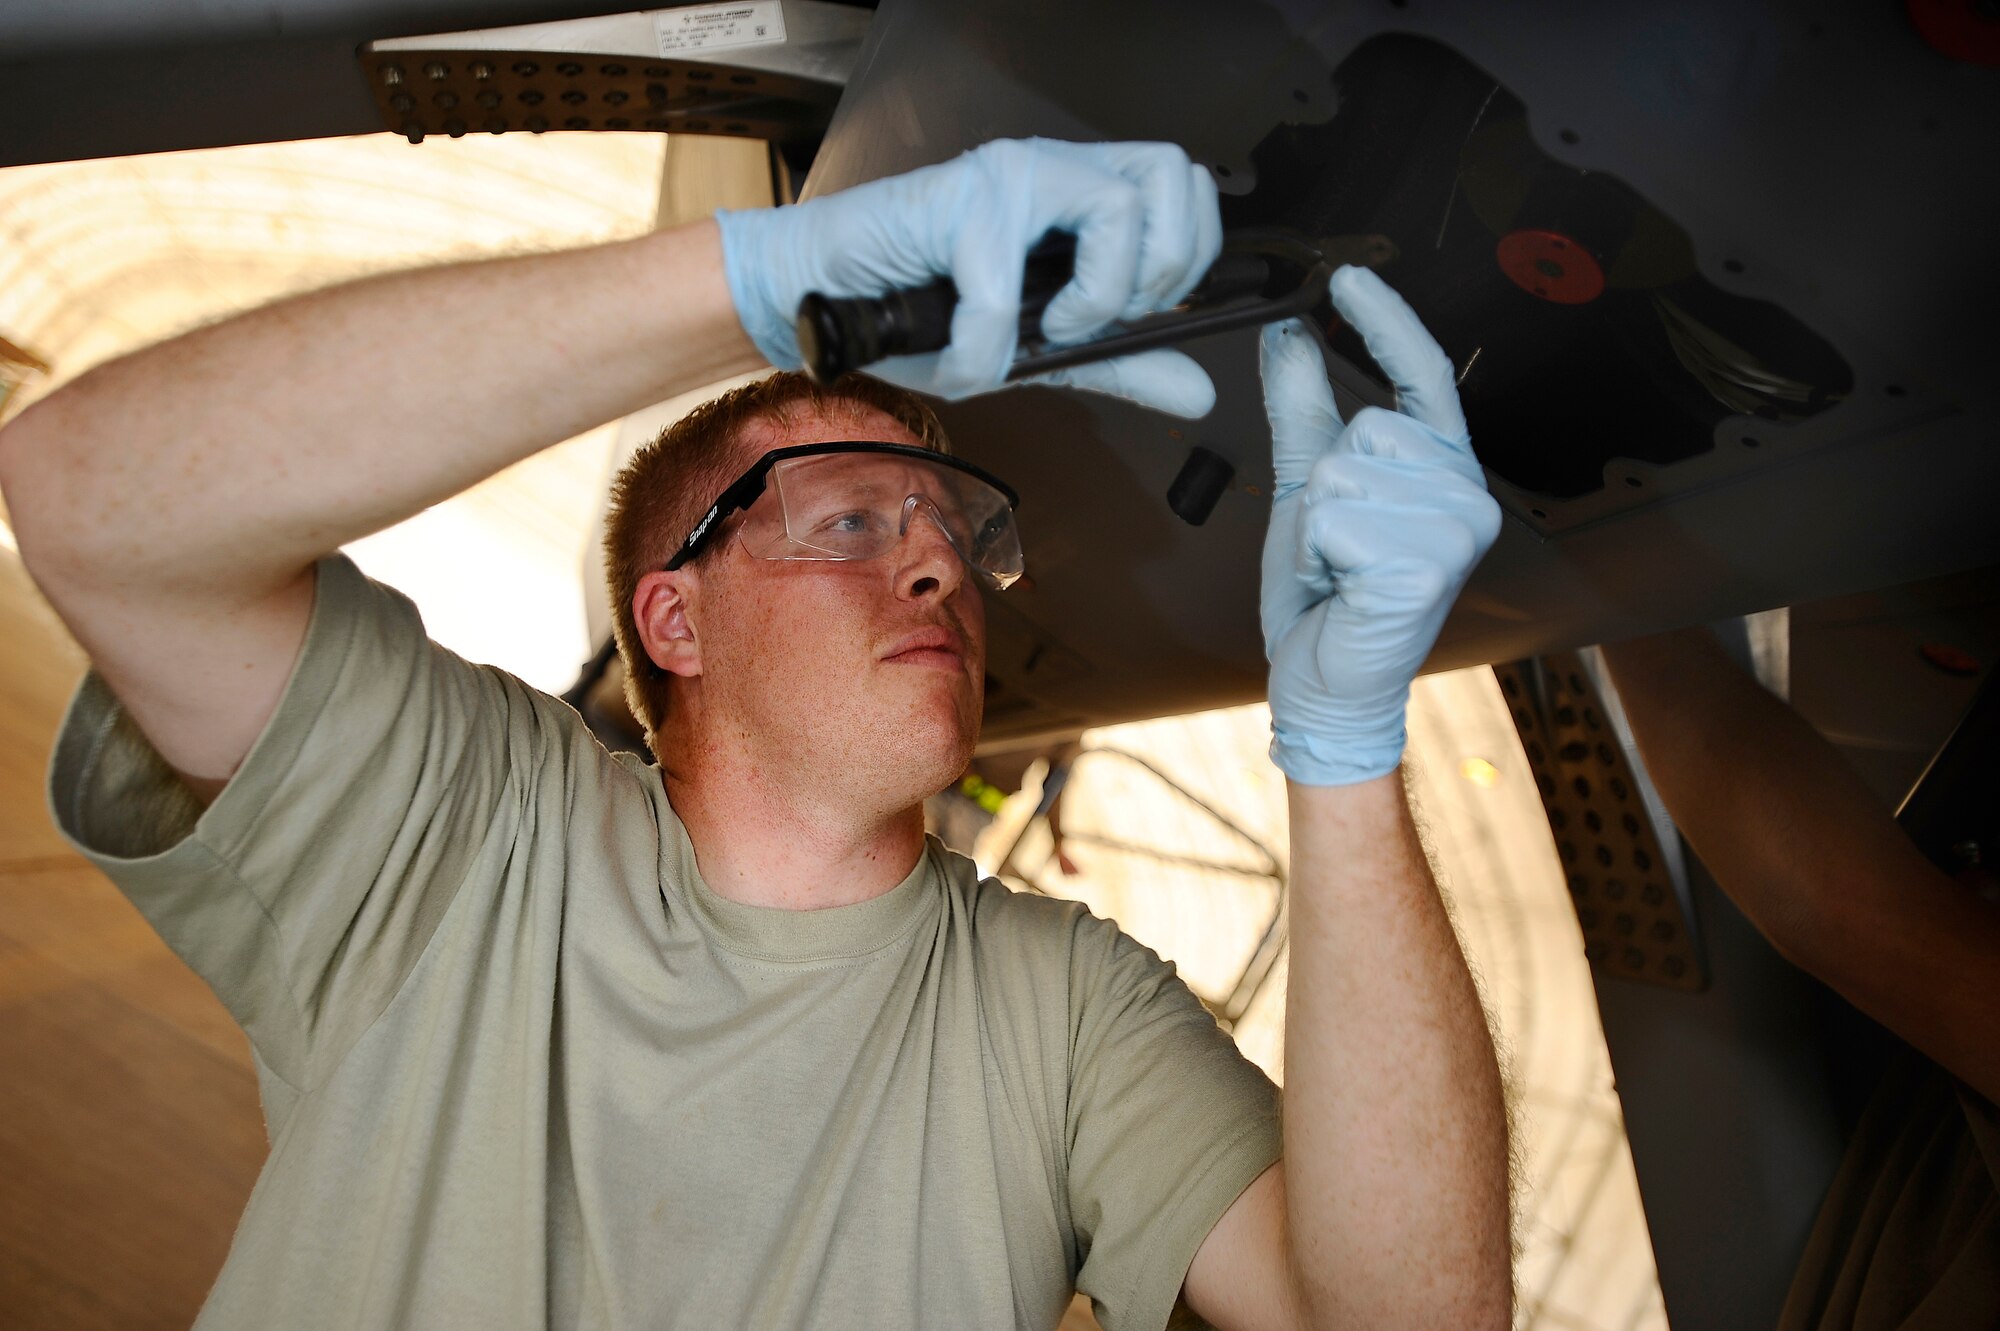 Senior Airman Timothy Boden attaches safety wiring to the underside of an MQ-9 Reaper at Joint Base Balad, Iraq, Nov. 22. A coalition force of experts from the U.S. Air Force and Royal Air Force deployed here to man a new Reaper aircraft maintenance unit. The unit is attached to the 46th Expeditionary Reconnaissance and Attack Squadron and assumed maintenance duties from General Atomics, which produces the Reaper for these services. Boden, a Reaper crew chief assigned to the 332nd Expeditionary Aircraft Maintenance Squadron, is deployed from Creech Air Force Base, Nev. His hometown is Bismarck, Ill. (U.S. Air Force photo/Airman 1st Class Jason Epley)(Released)